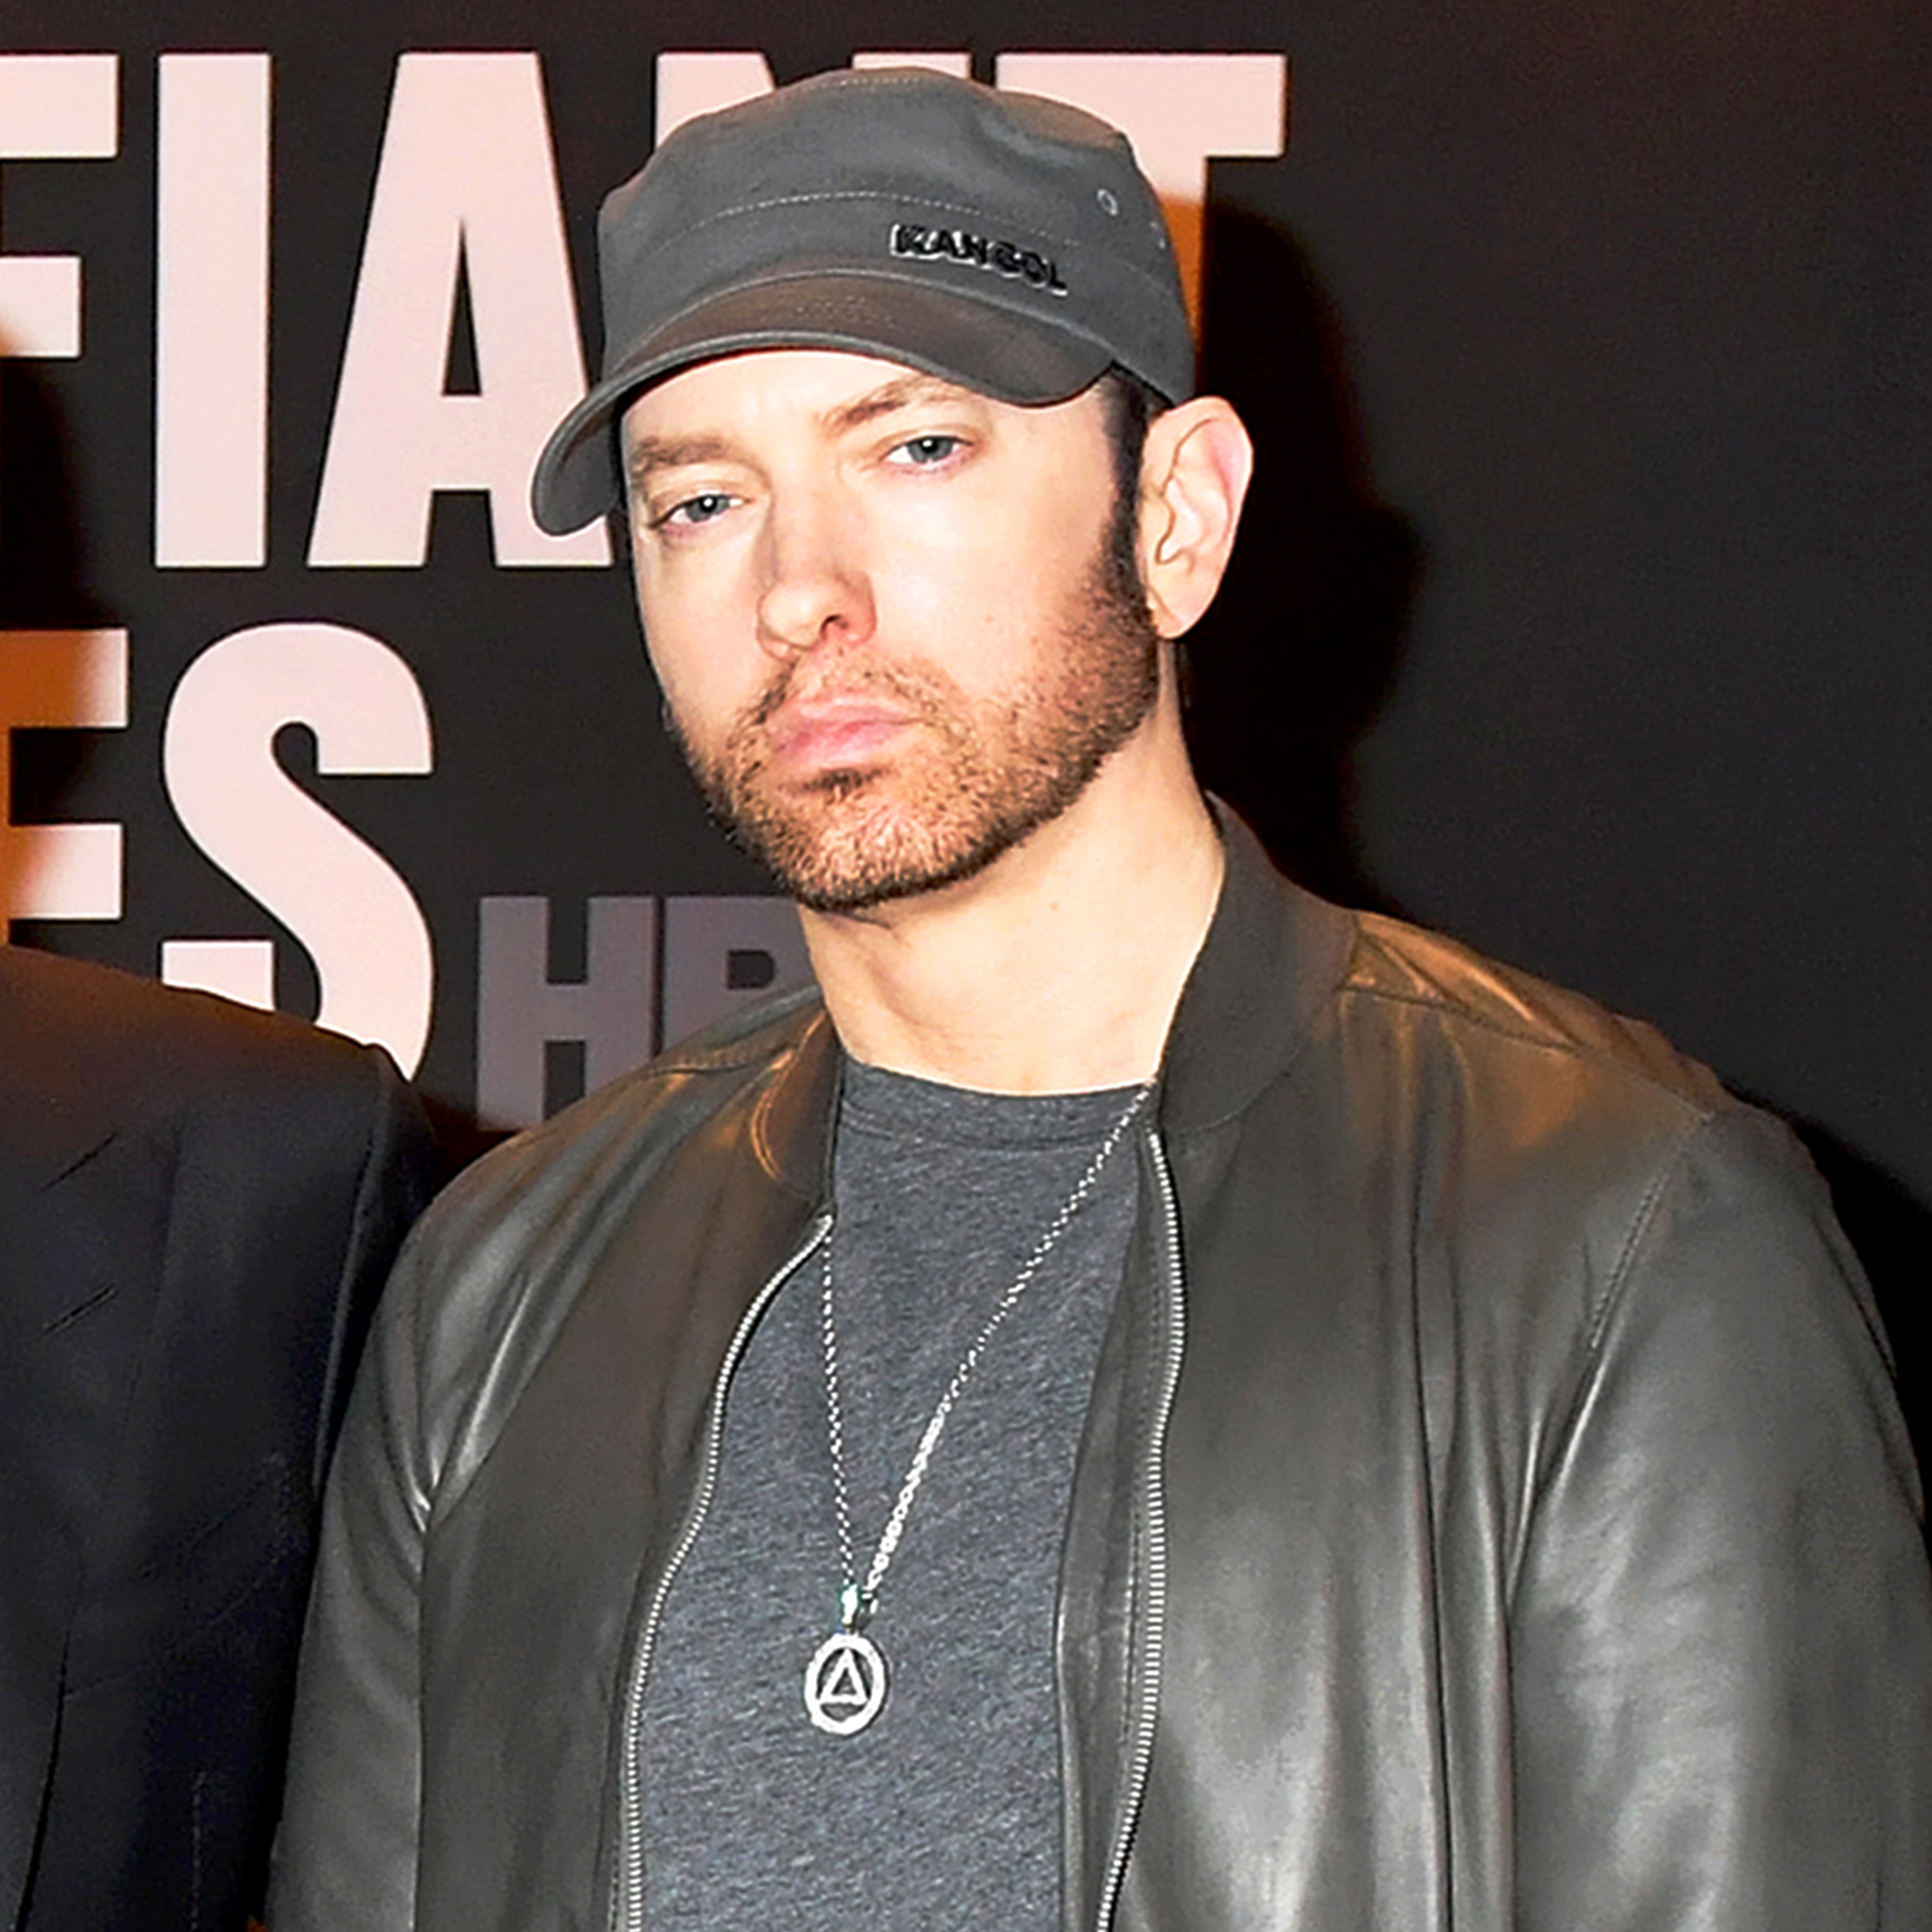 Eminem Has a Beard Now, Looks Totally Different
